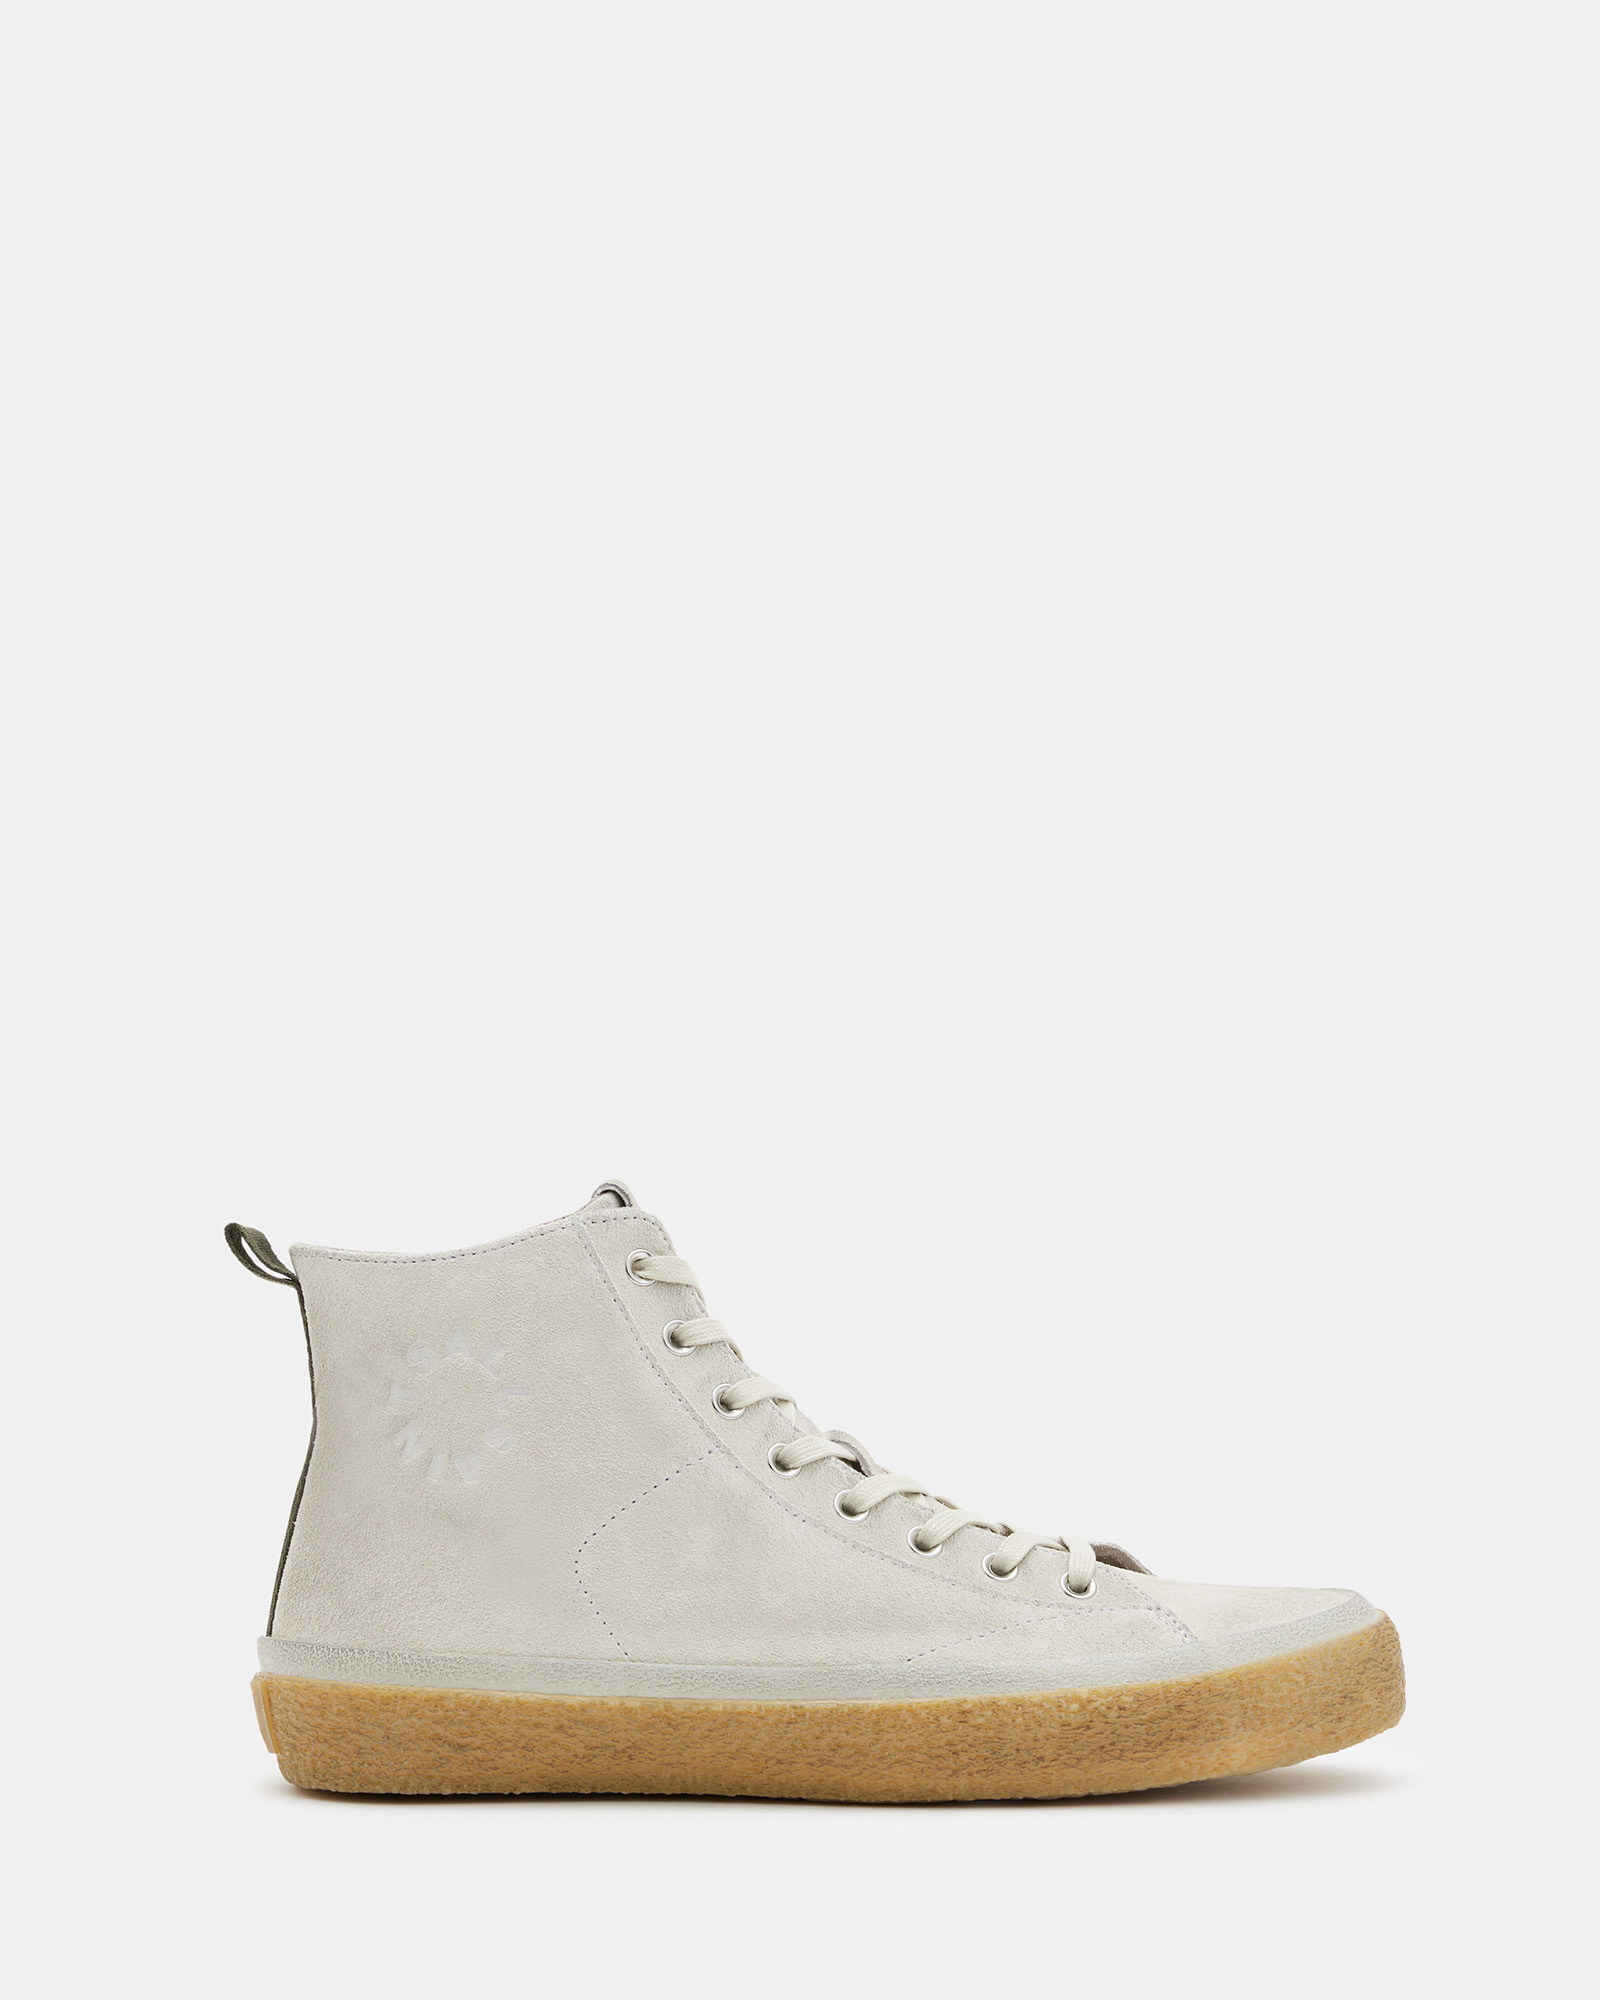 AllSaints Crister Logo Leather High Top Trainers,, Chalk White